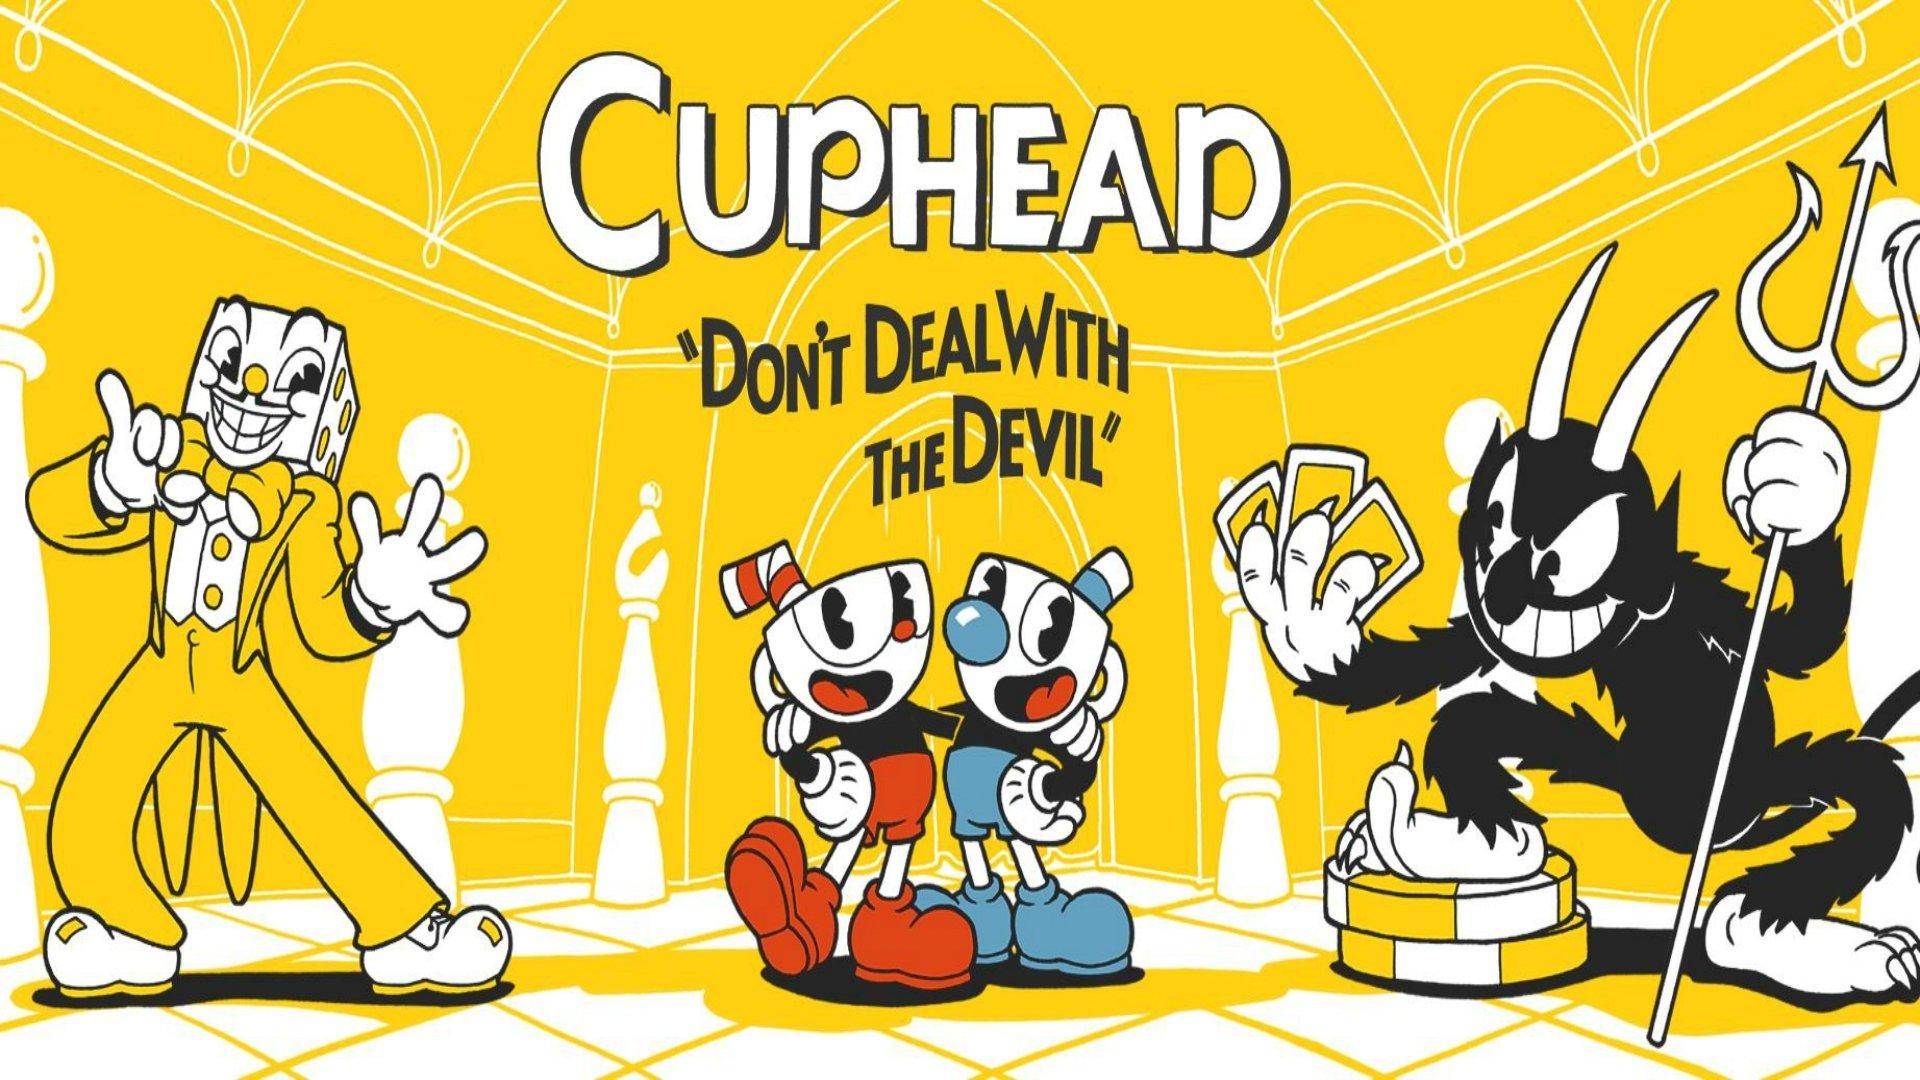 Cuphead Wallpapers Top Free Cuphead Backgrounds Wallpaperaccess Images, Photos, Reviews